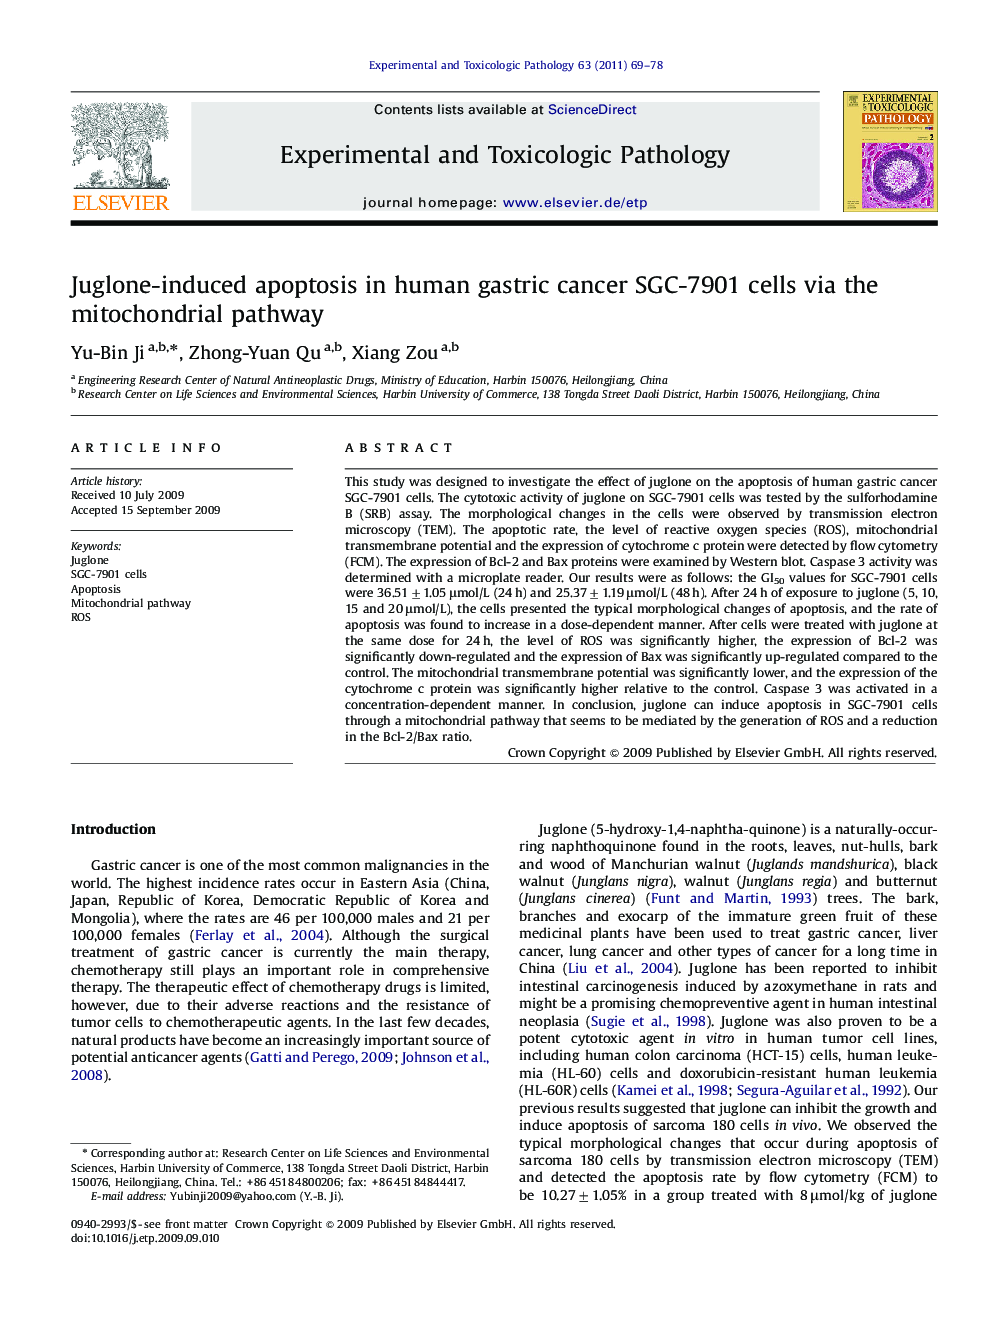 Juglone-induced apoptosis in human gastric cancer SGC-7901 cells via the mitochondrial pathway